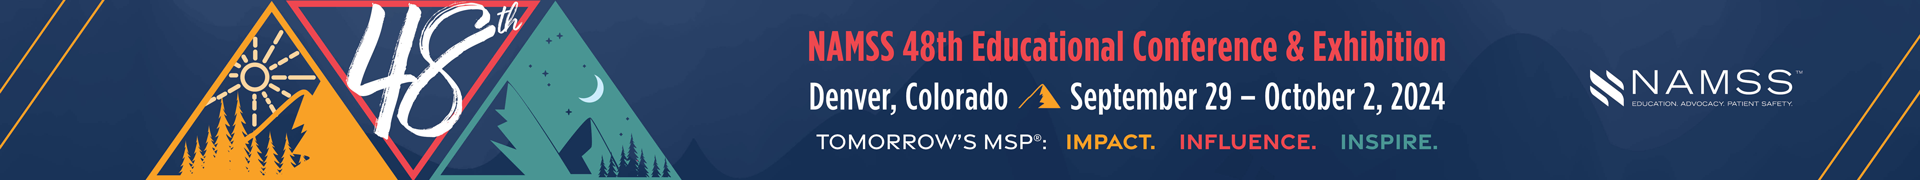 NAMSS 48th Educational Conference & Exhibition Event Banner